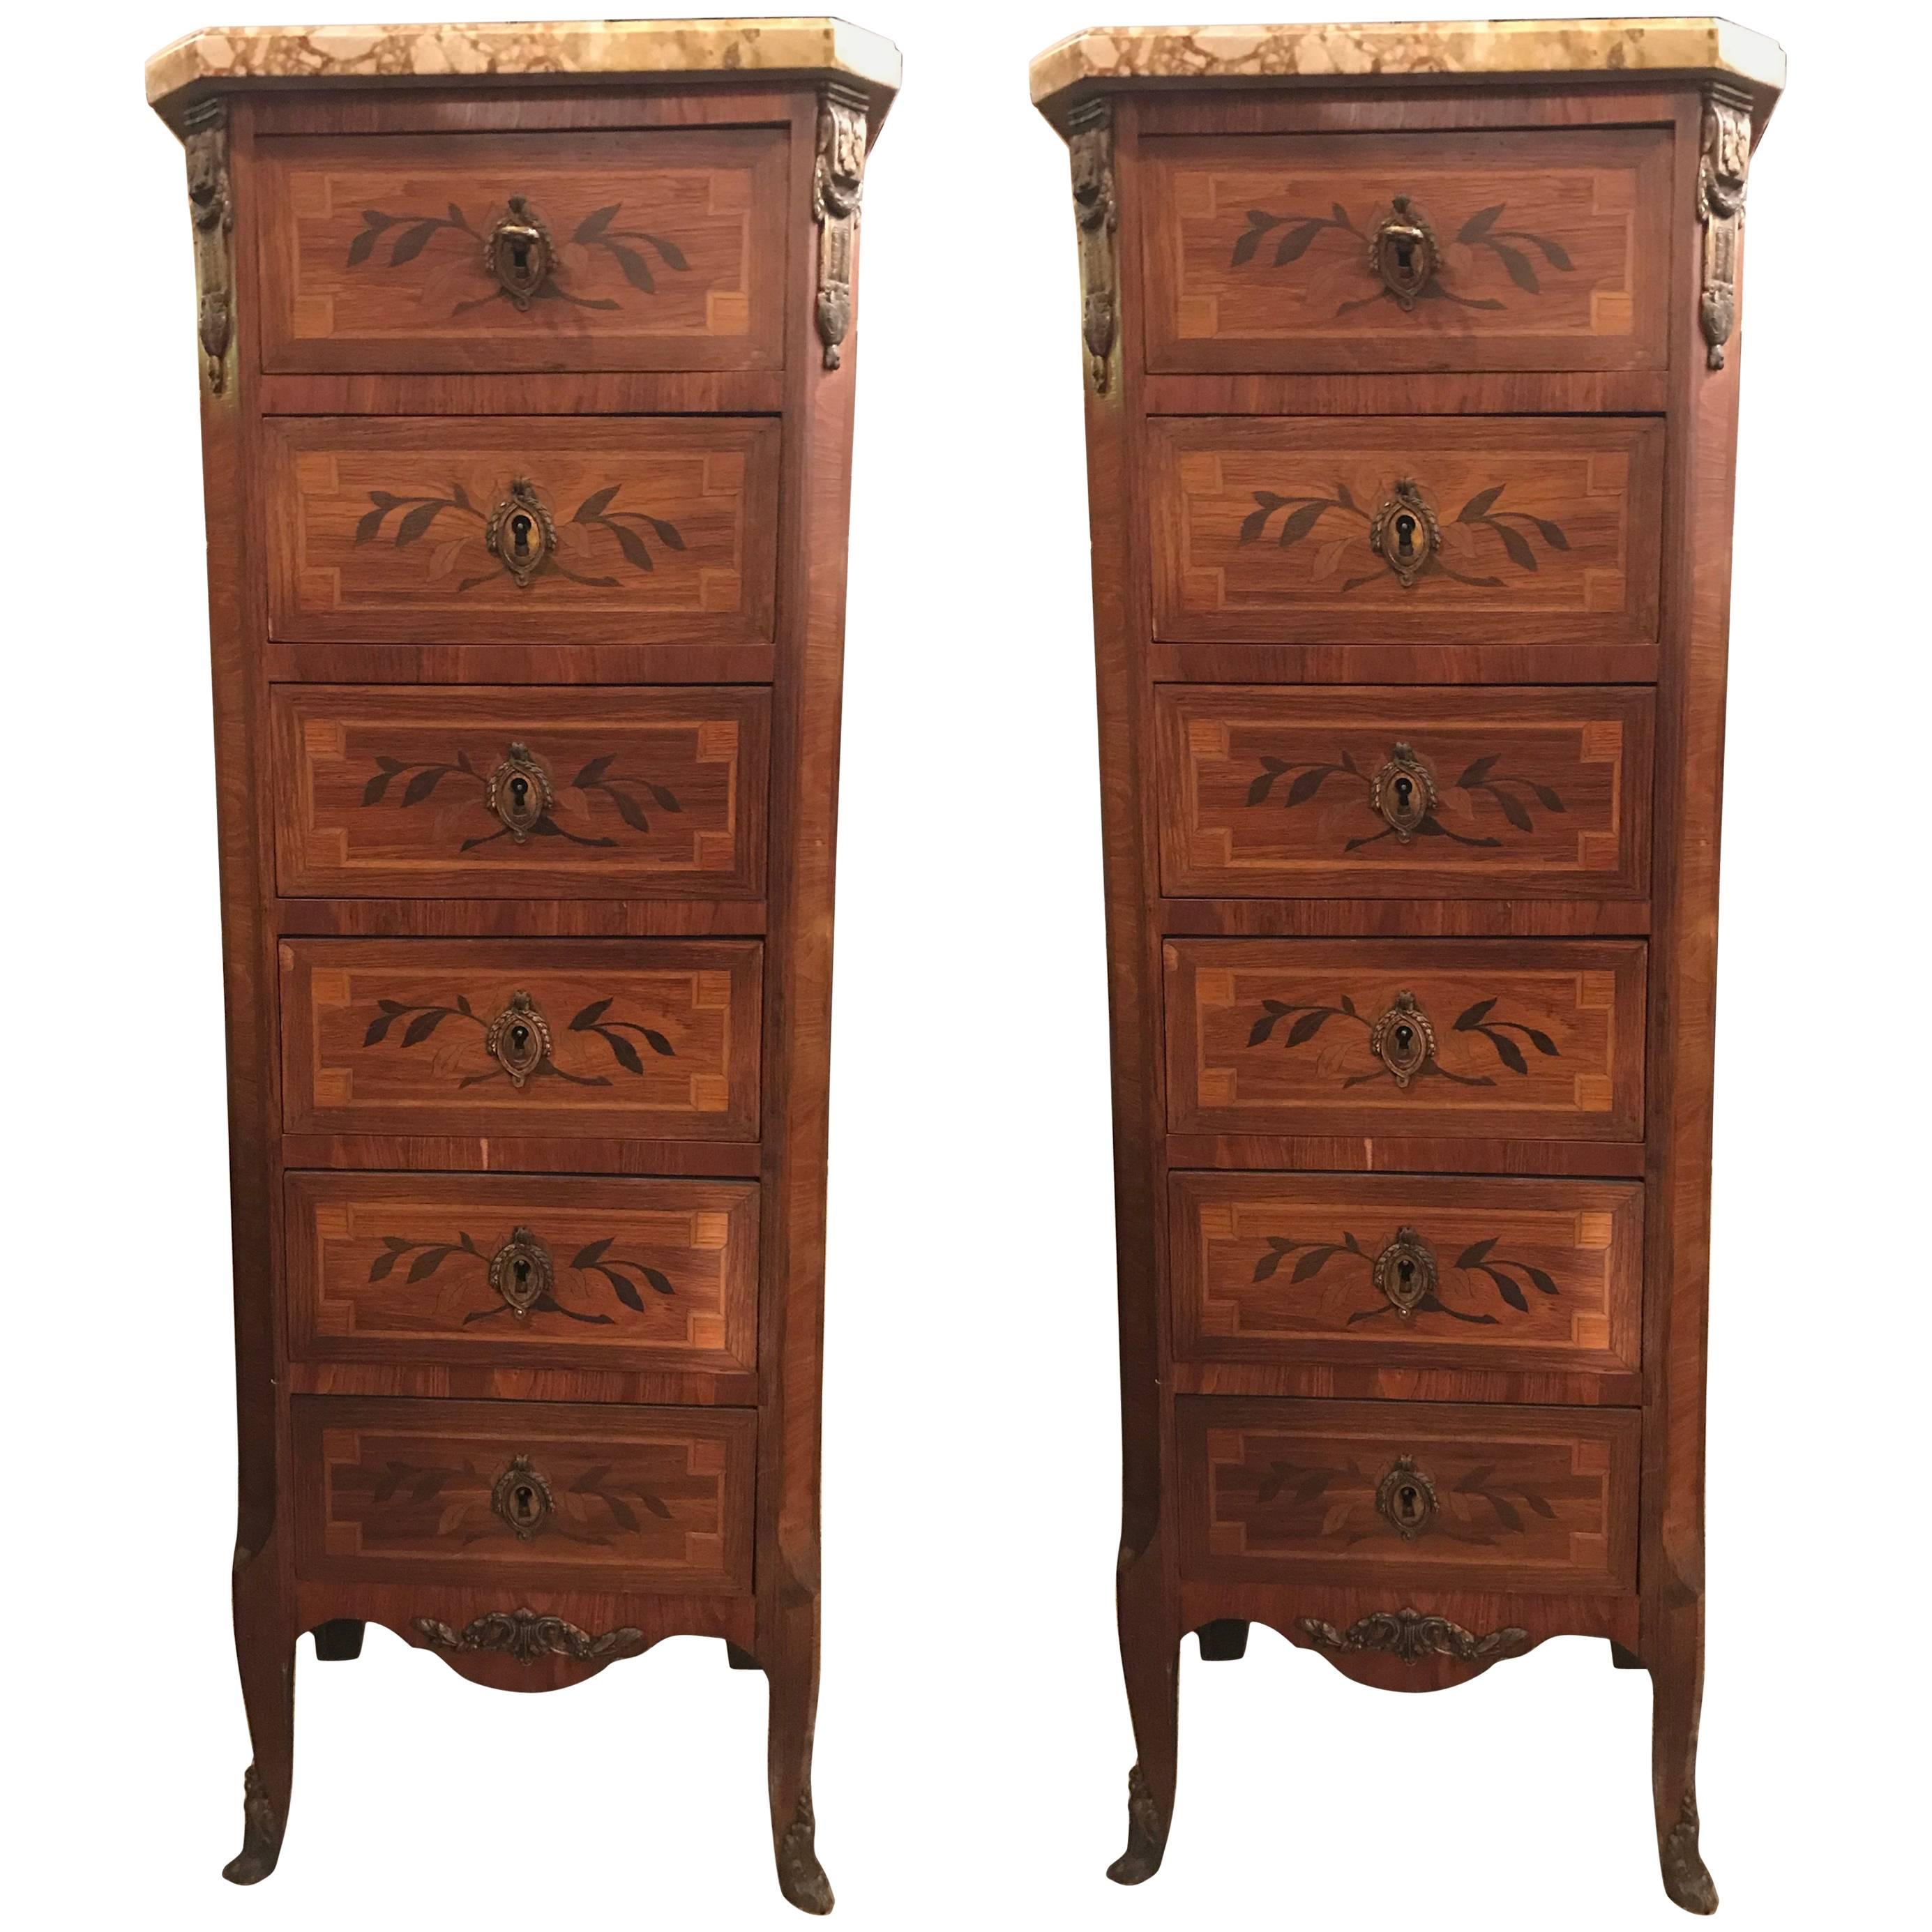 Pair of 19th Century Tall Lingerie Louis XV Style Chests or Pedestals Chests